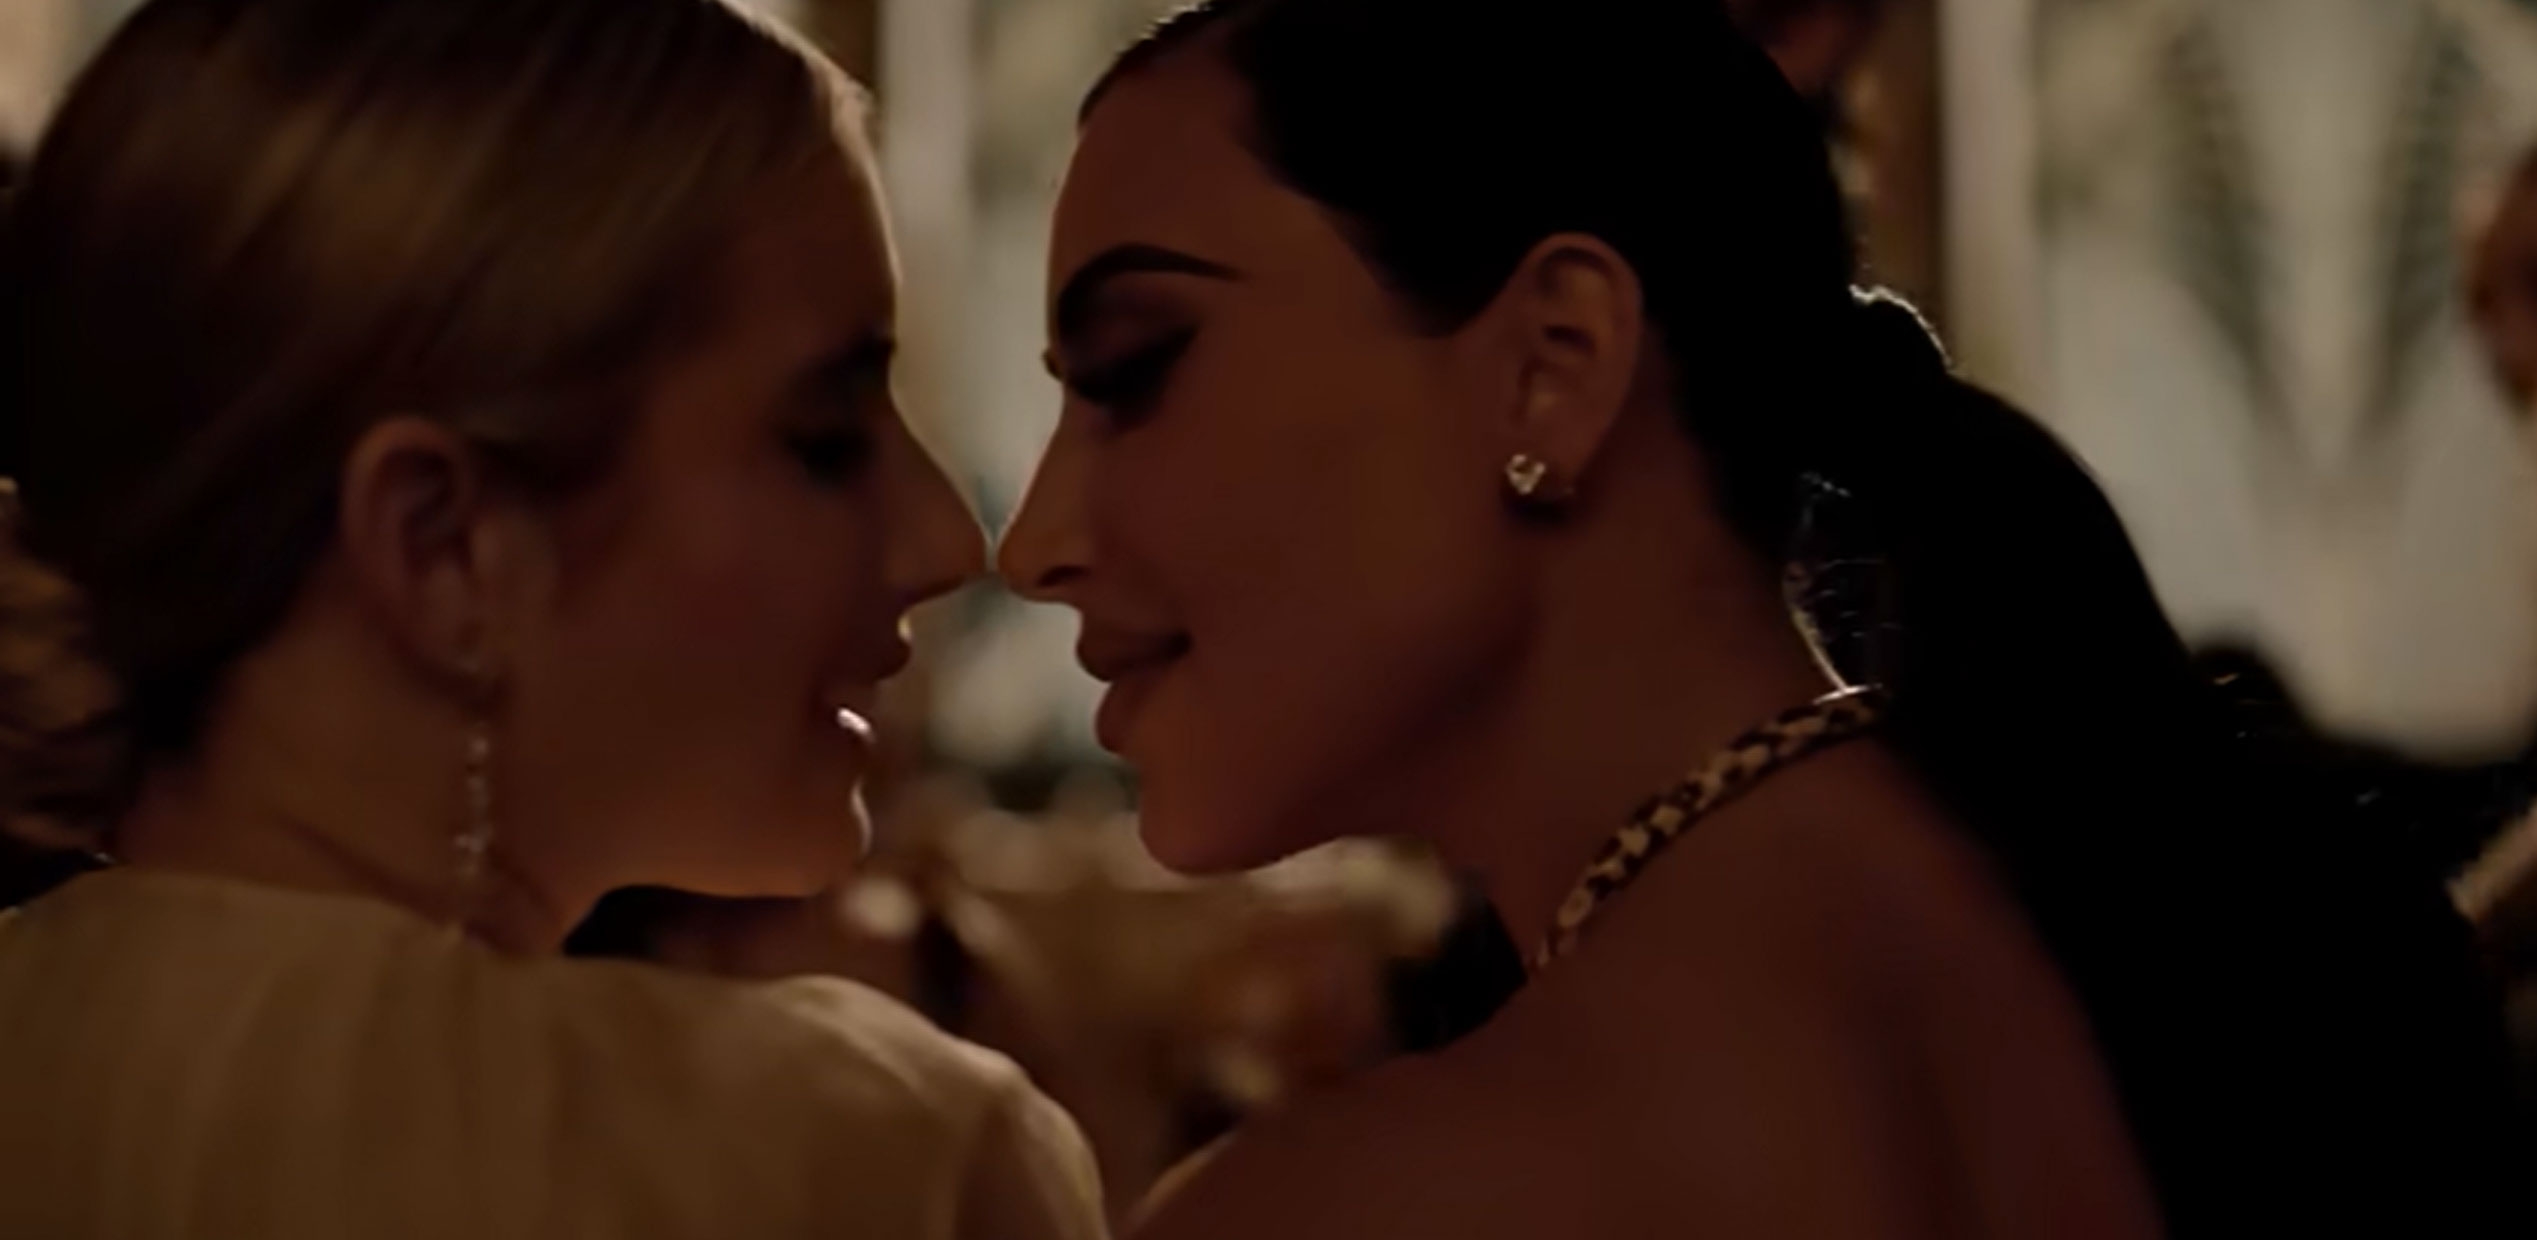 Kim shared a spicy scene with co-star Emma Roberts in the trailer for the second half of Season 12 of American Horror Story